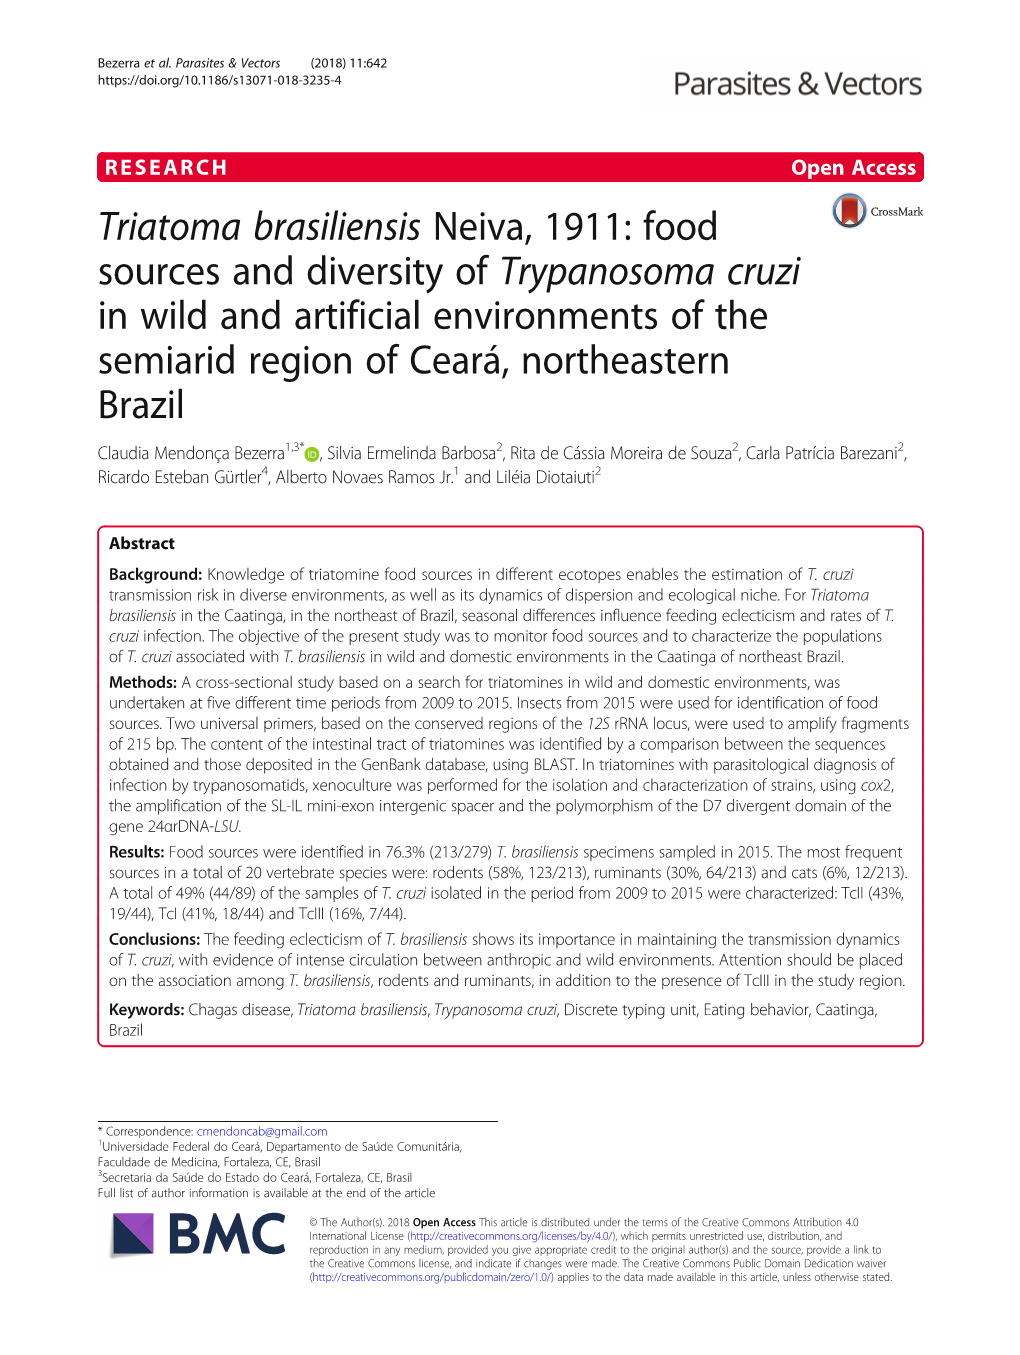 Triatoma Brasiliensis Neiva, 1911: Food Sources and Diversity Of